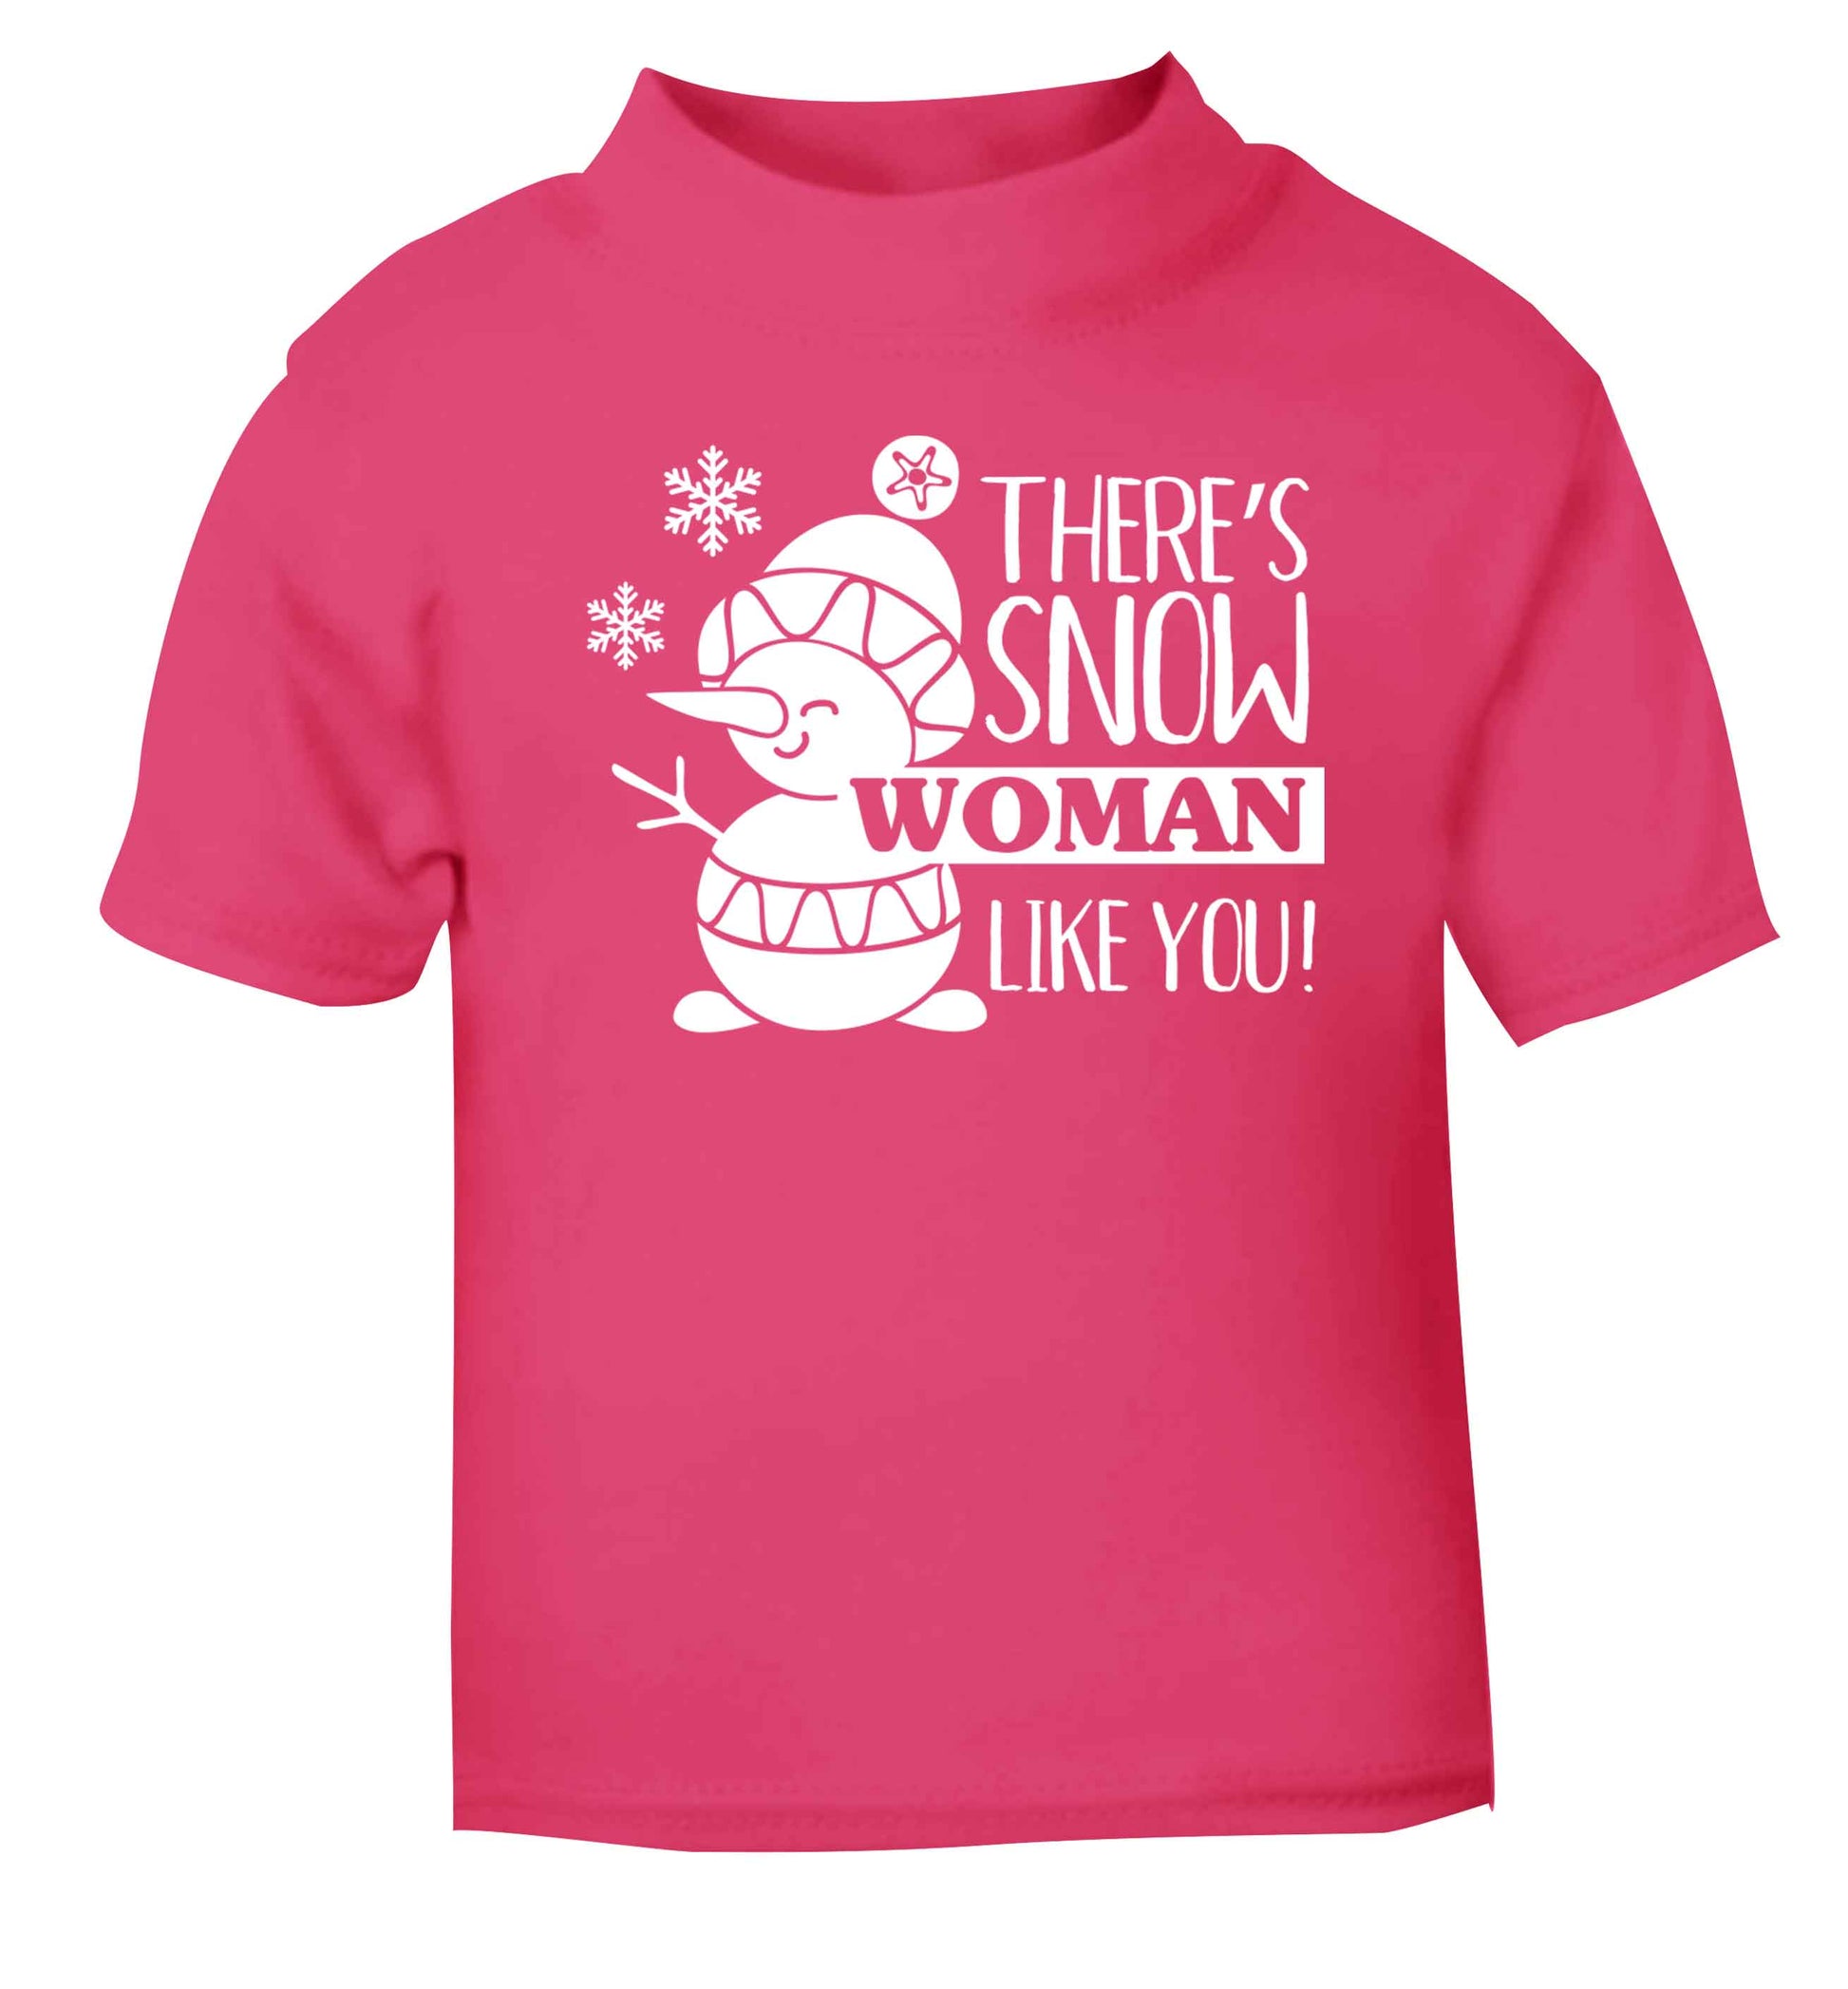 There's snow woman like you pink baby toddler Tshirt 2 Years